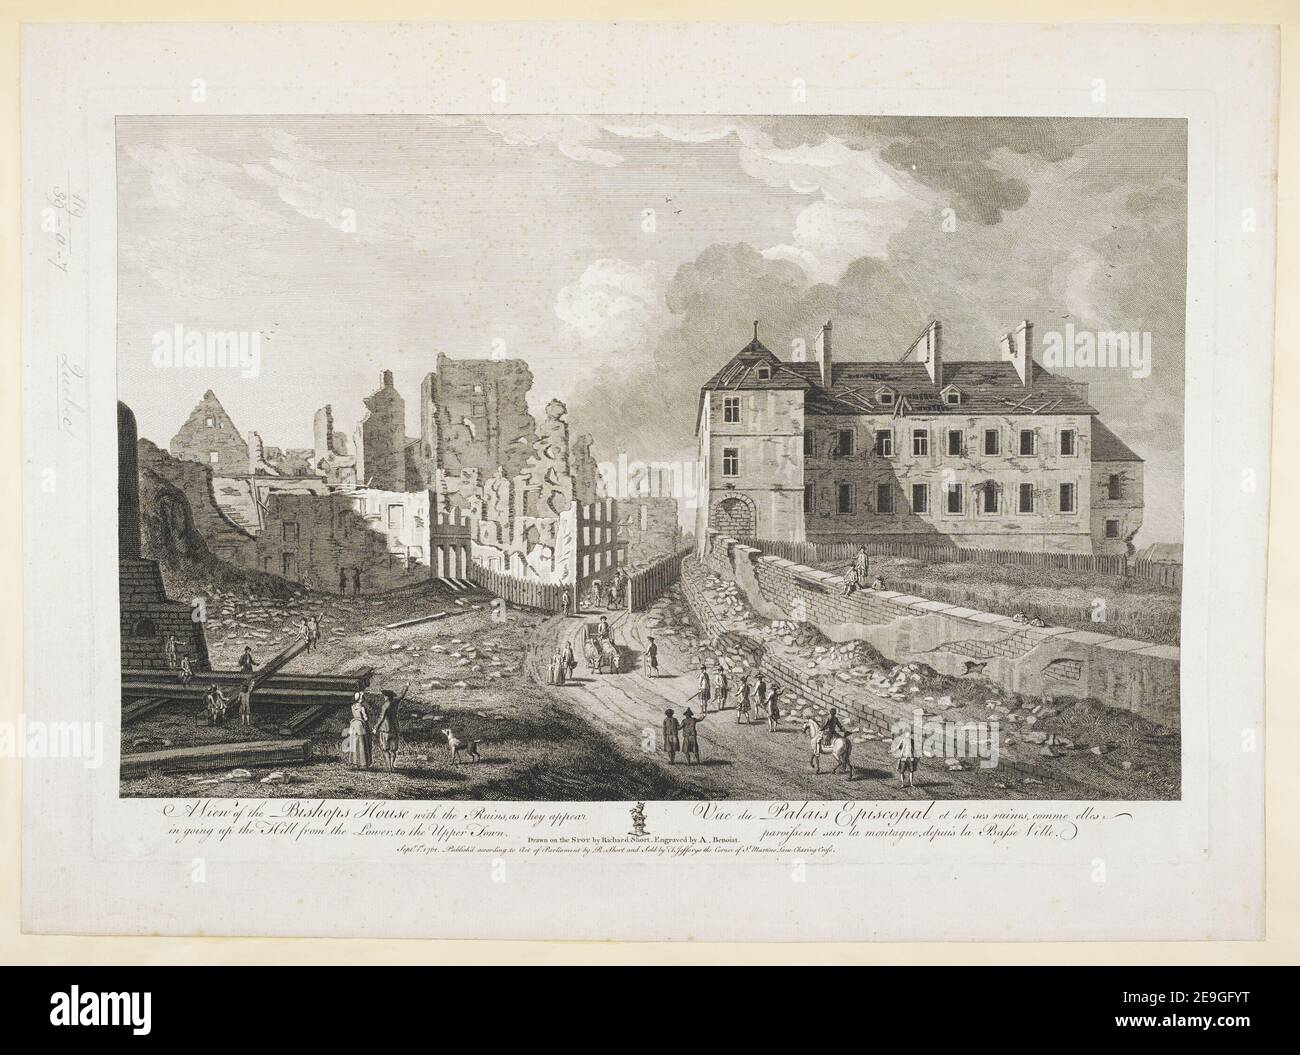 A View of the Bishop's House with the Ruins, as they appear in going up the Hill from the Lower to the Upper Town.  Author  Benoist, A. 119.39.a.7. Place of publication: [London] Publisher: Septr 1st 1761. Publish'd according to Act of Parliament by R. Short , Sold by Thos Jefferys the Corner of St Martins Lane, Charing Cross., Date of publication: [September 1 1761]  Item type: 1 print Medium: etching and engraving Dimensions: platemark 36.6 x 53.5 cm, on sheet 43.3 x 59.2 cm  Former owner: George III, King of Great Britain, 1738-1820 Stock Photo